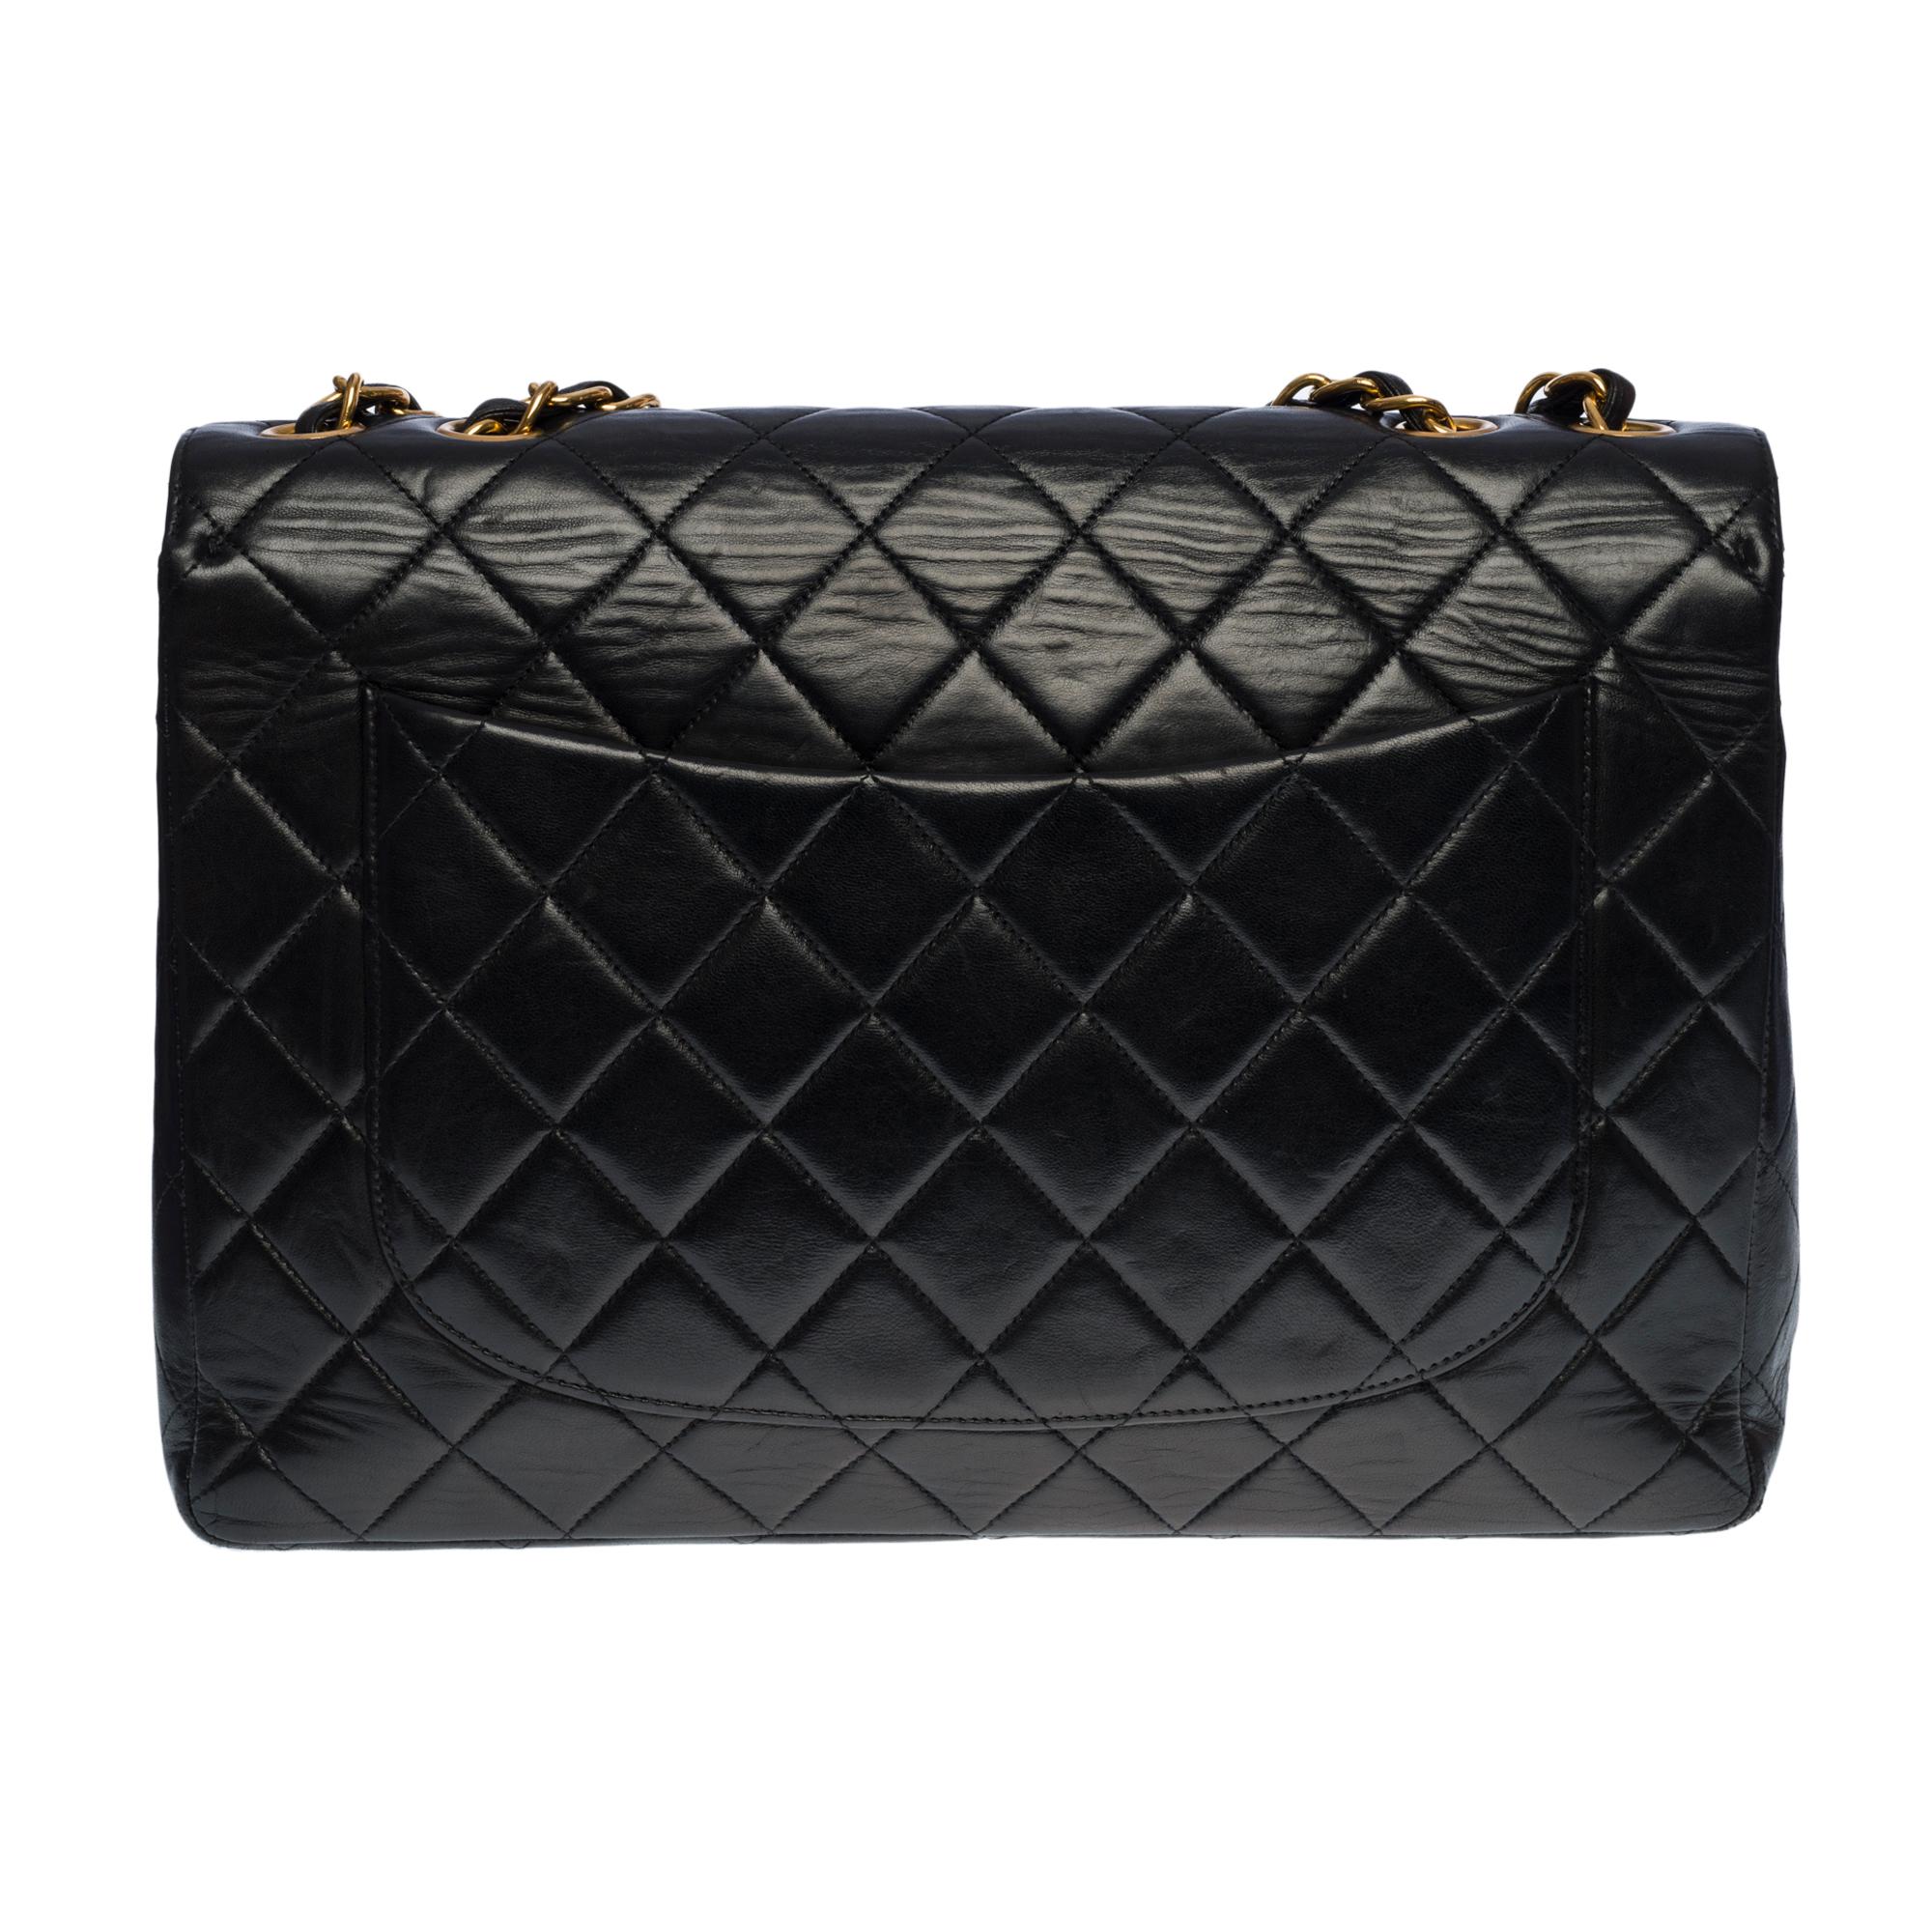 The Majestic Chanel Timeless Jumbo Single Flap shoulder bag in black quilted lambskin, gold-plated metal hardware, a gold-plated metal chain handle interlaced with black leather for a hand and shoulder carry
 
A patch pocket on the back of the